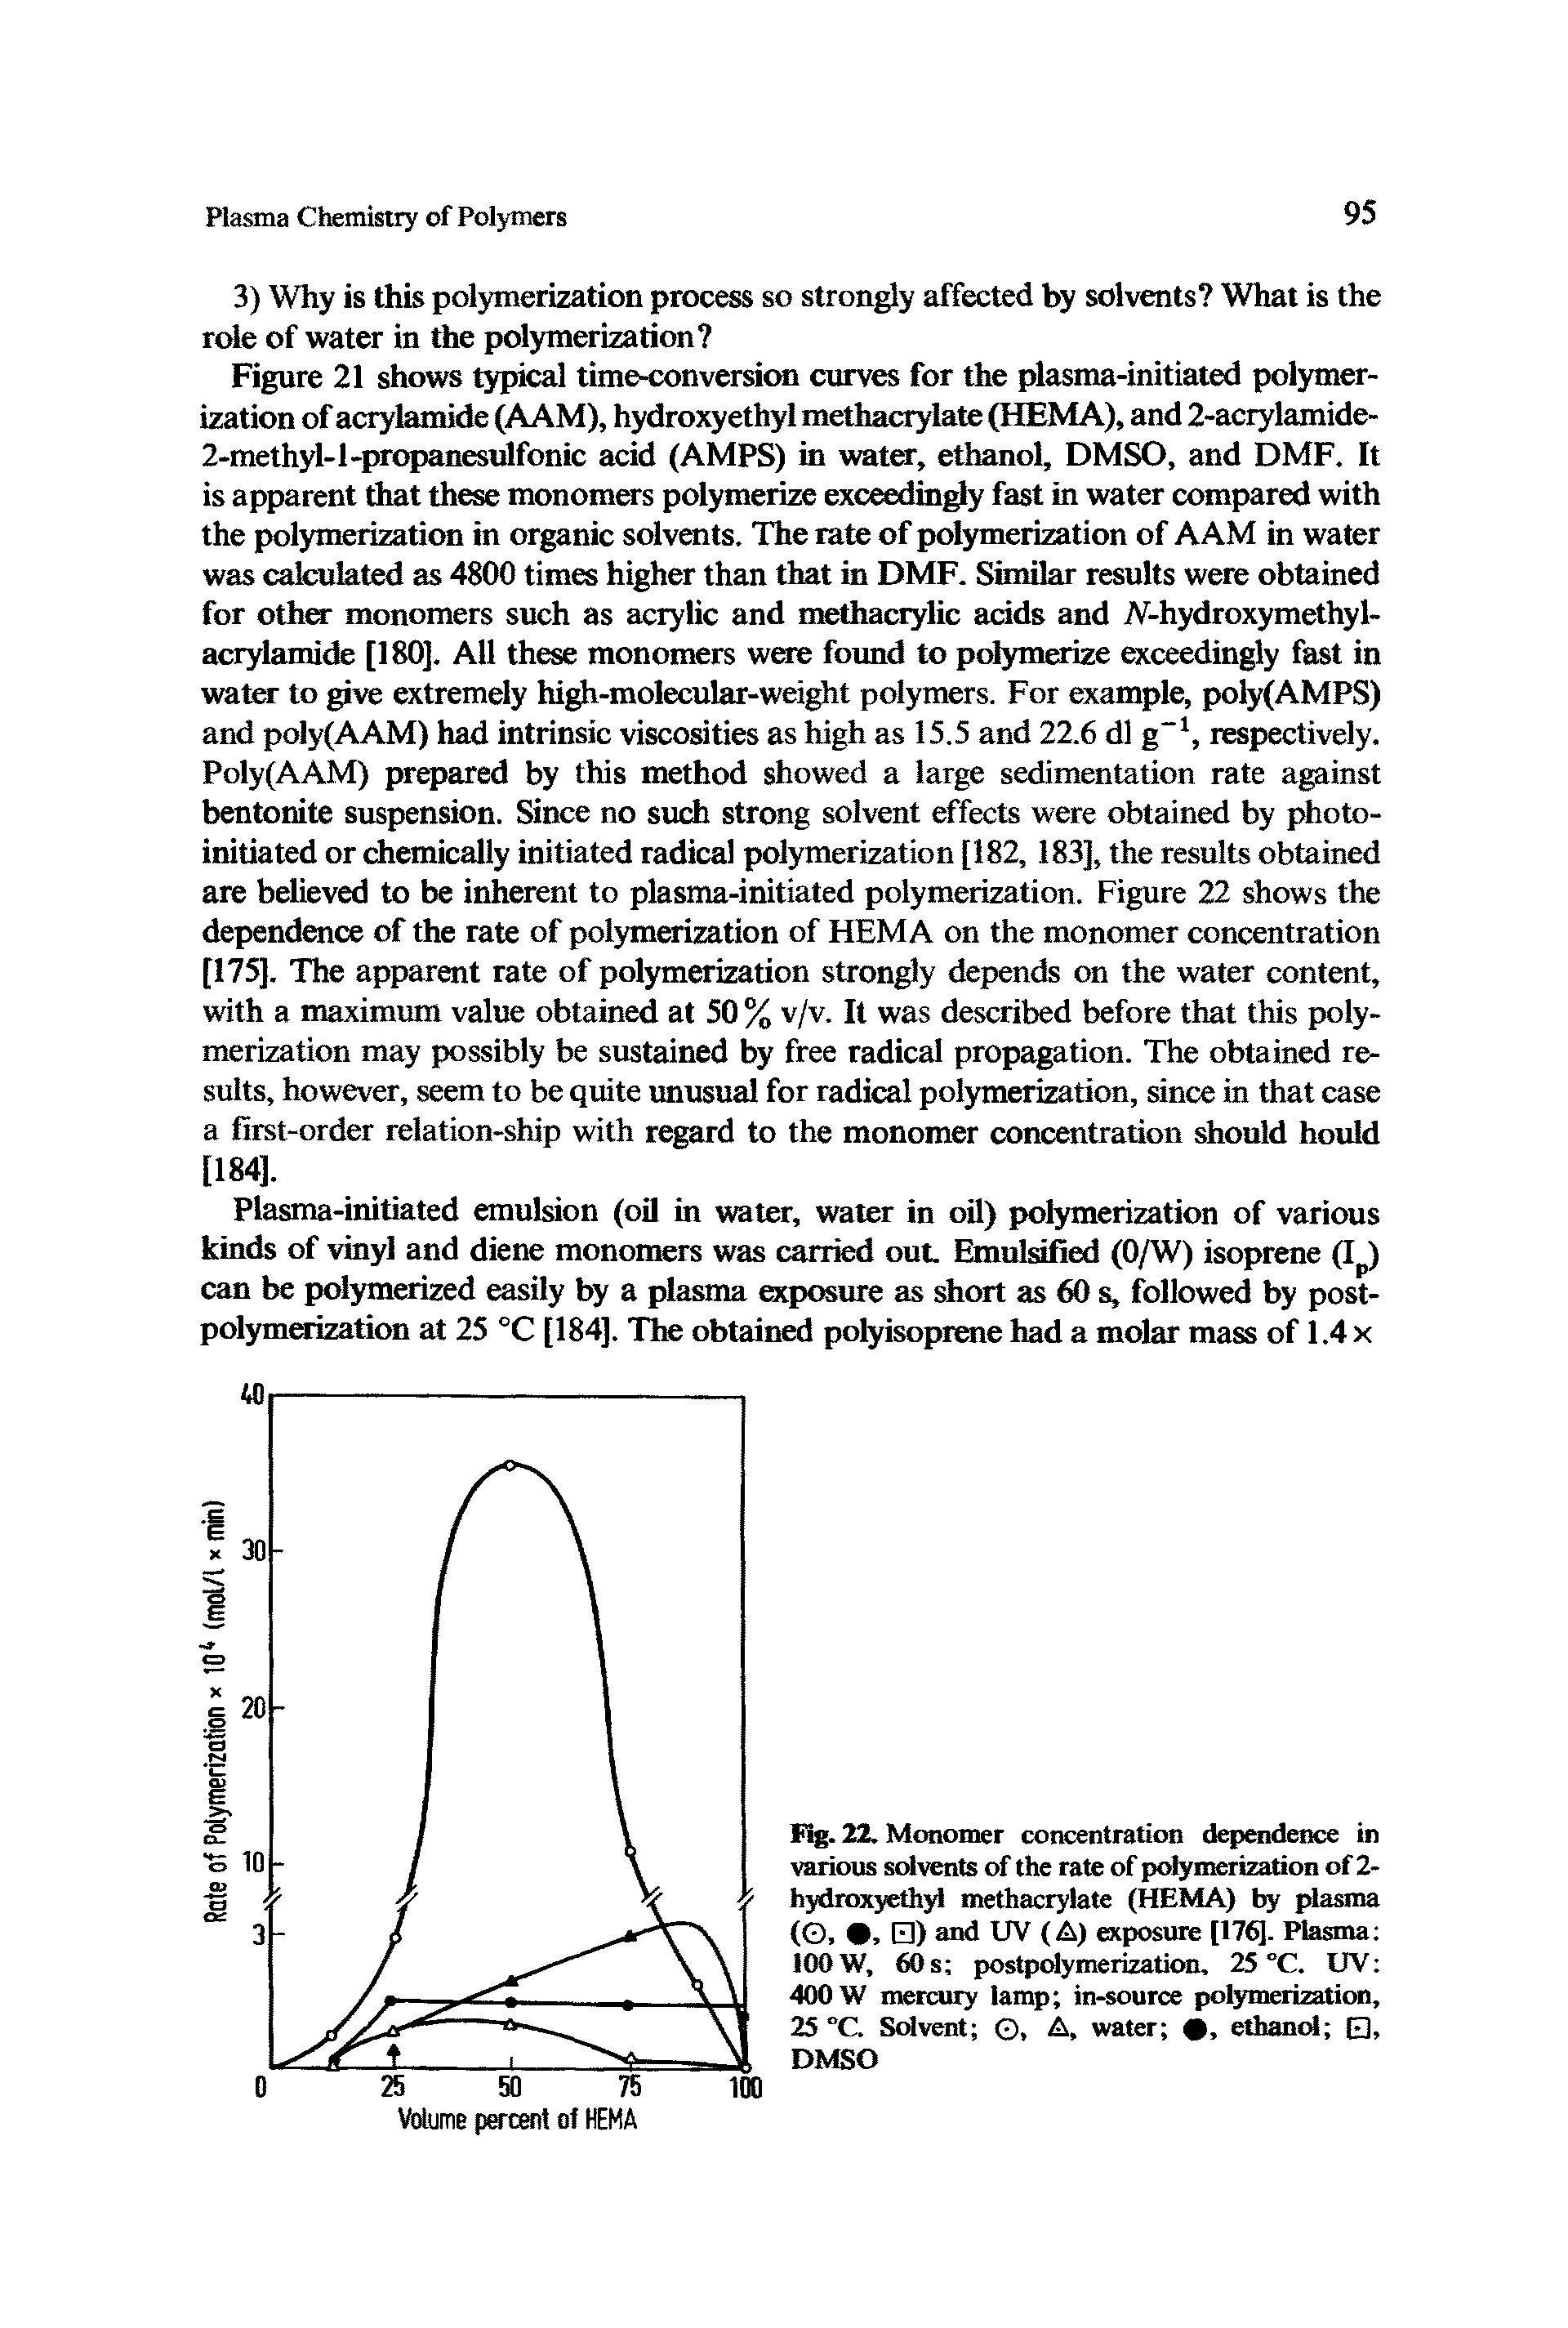 Fig. 22. Monomer concentration dependence in various solvents of the rate of polymerization of 2-hydroxyethyl methacrylate (HEMA) by plasma (O, , ) and UV (A) exposure [176]. Plasma 100 W, s postpdymerization. 25 °C. UV 400 W mercury lamp in-source polymerization, 25 °C. Solvent G. A, water , ethand 03, DMSO...